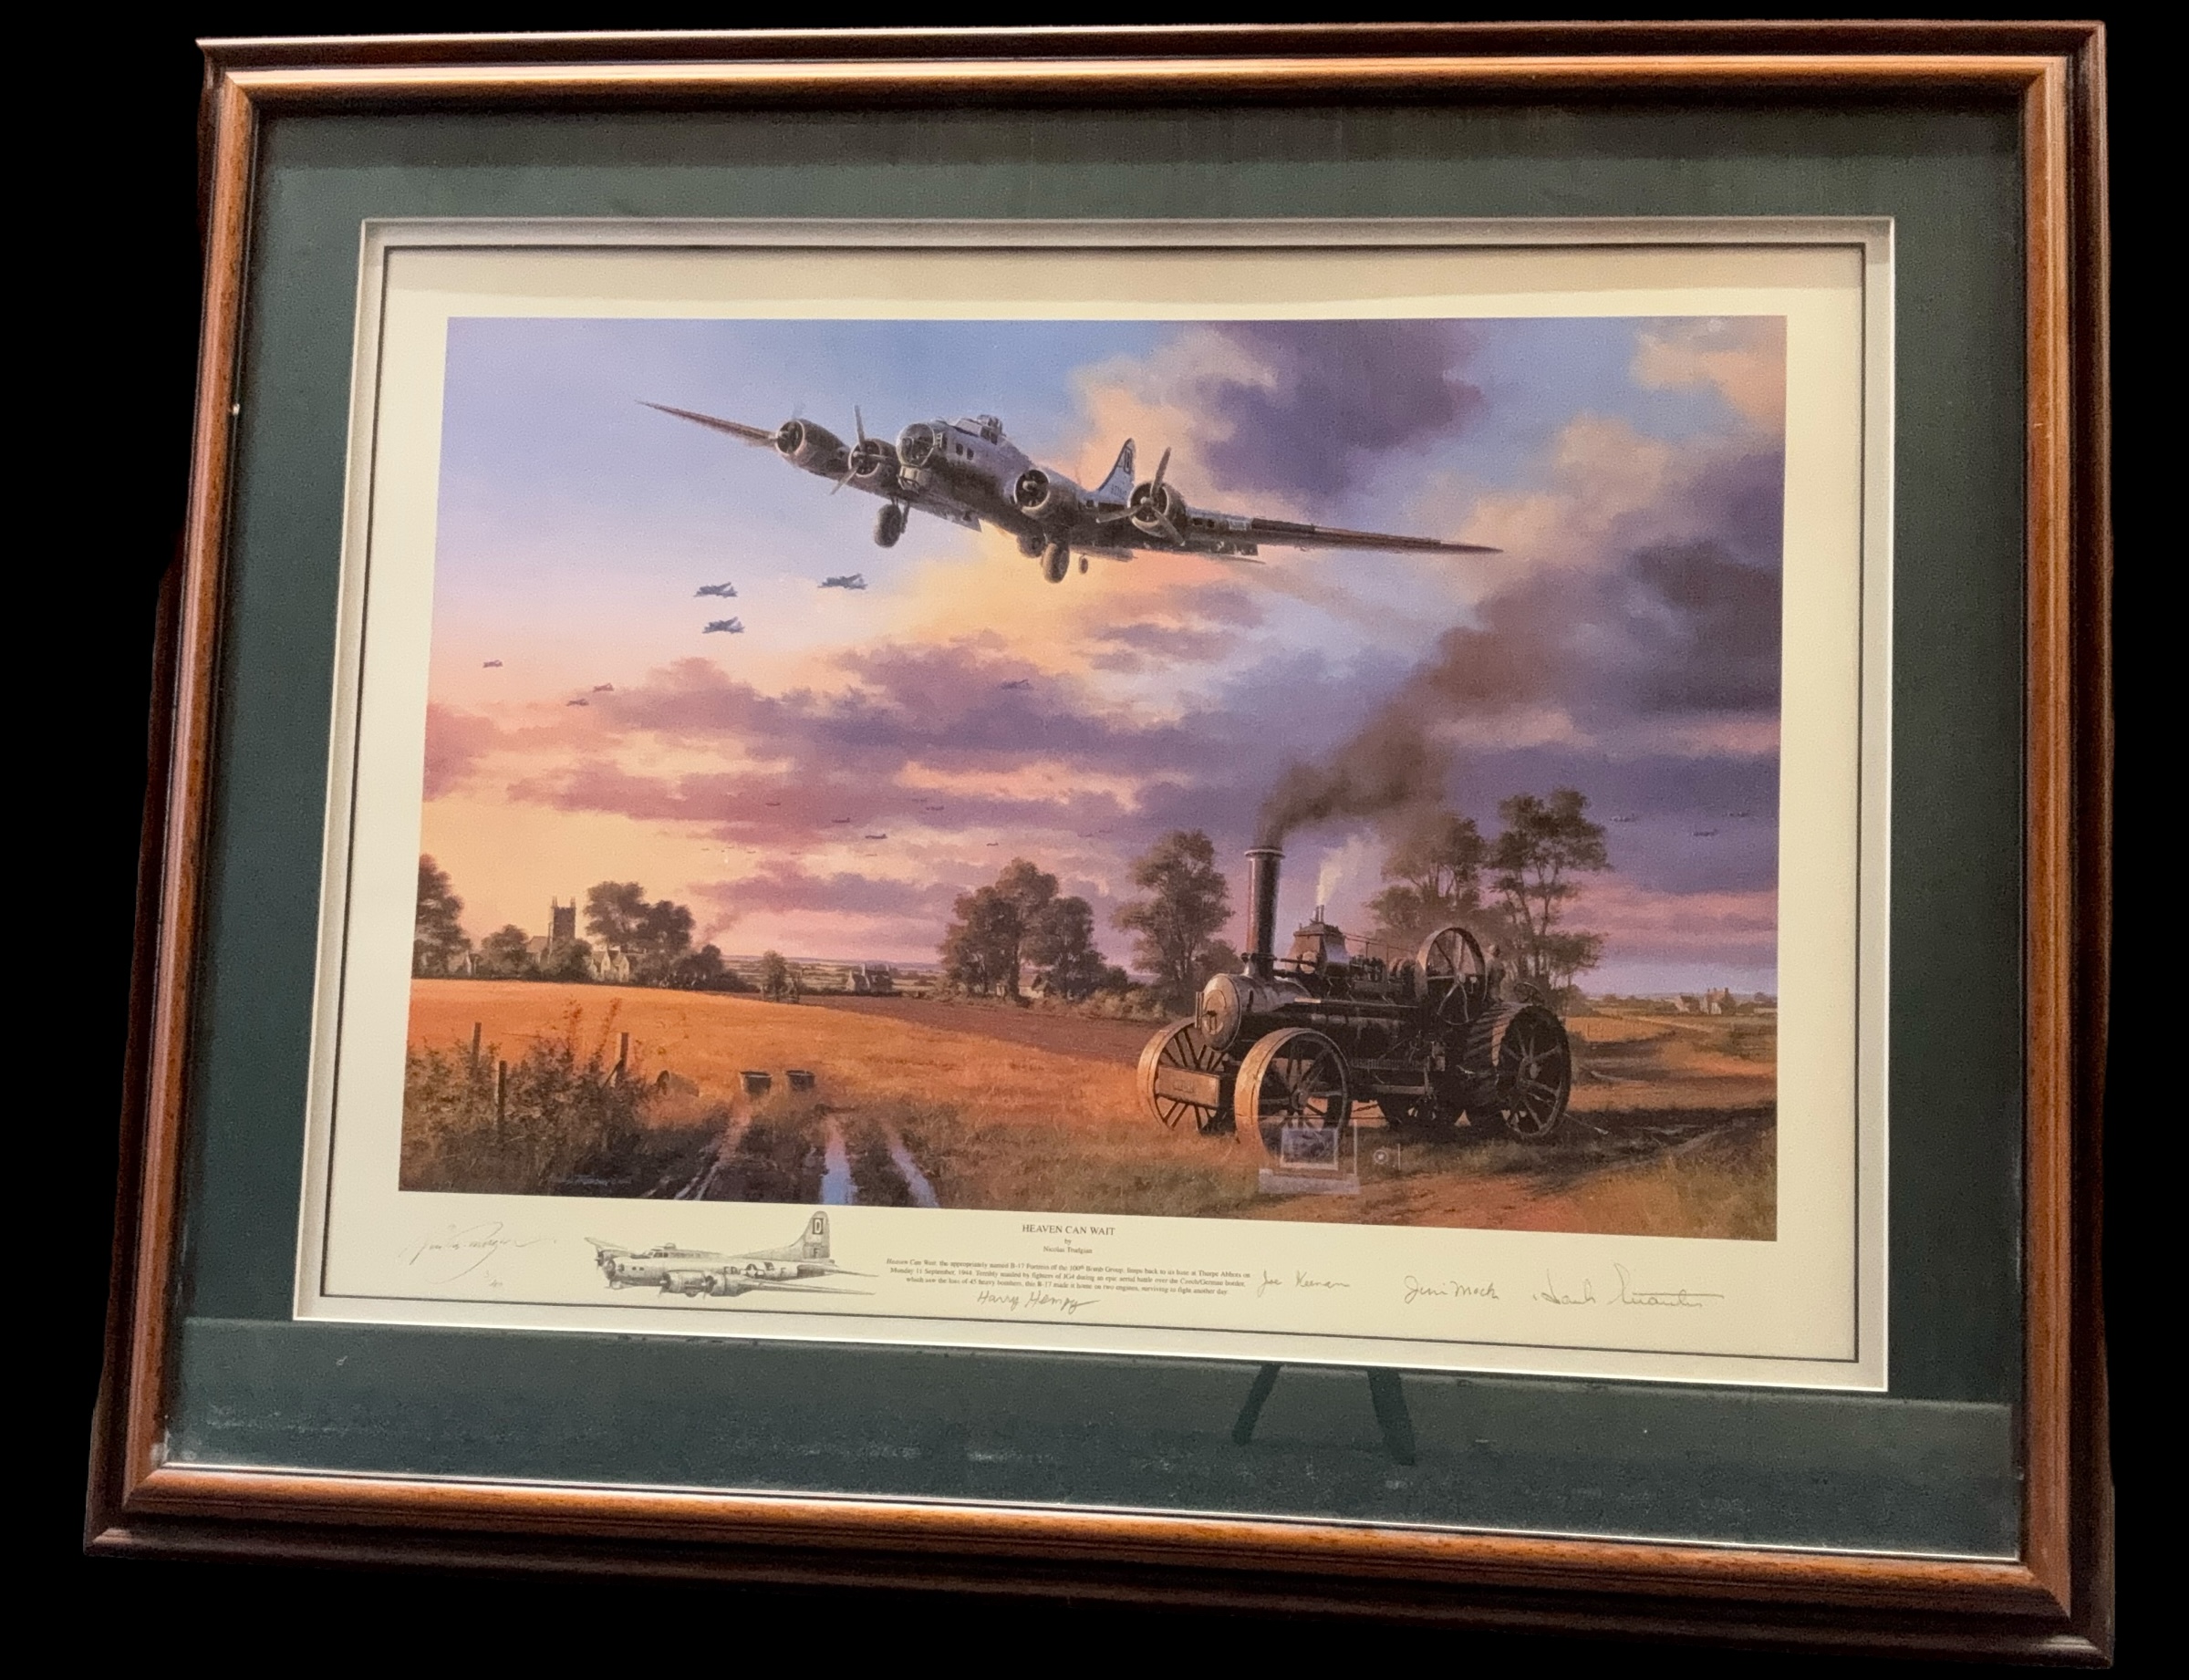 B-17F Flying Fortress signed colour photo. Mounted and framed to approx size 12x10inch. Good